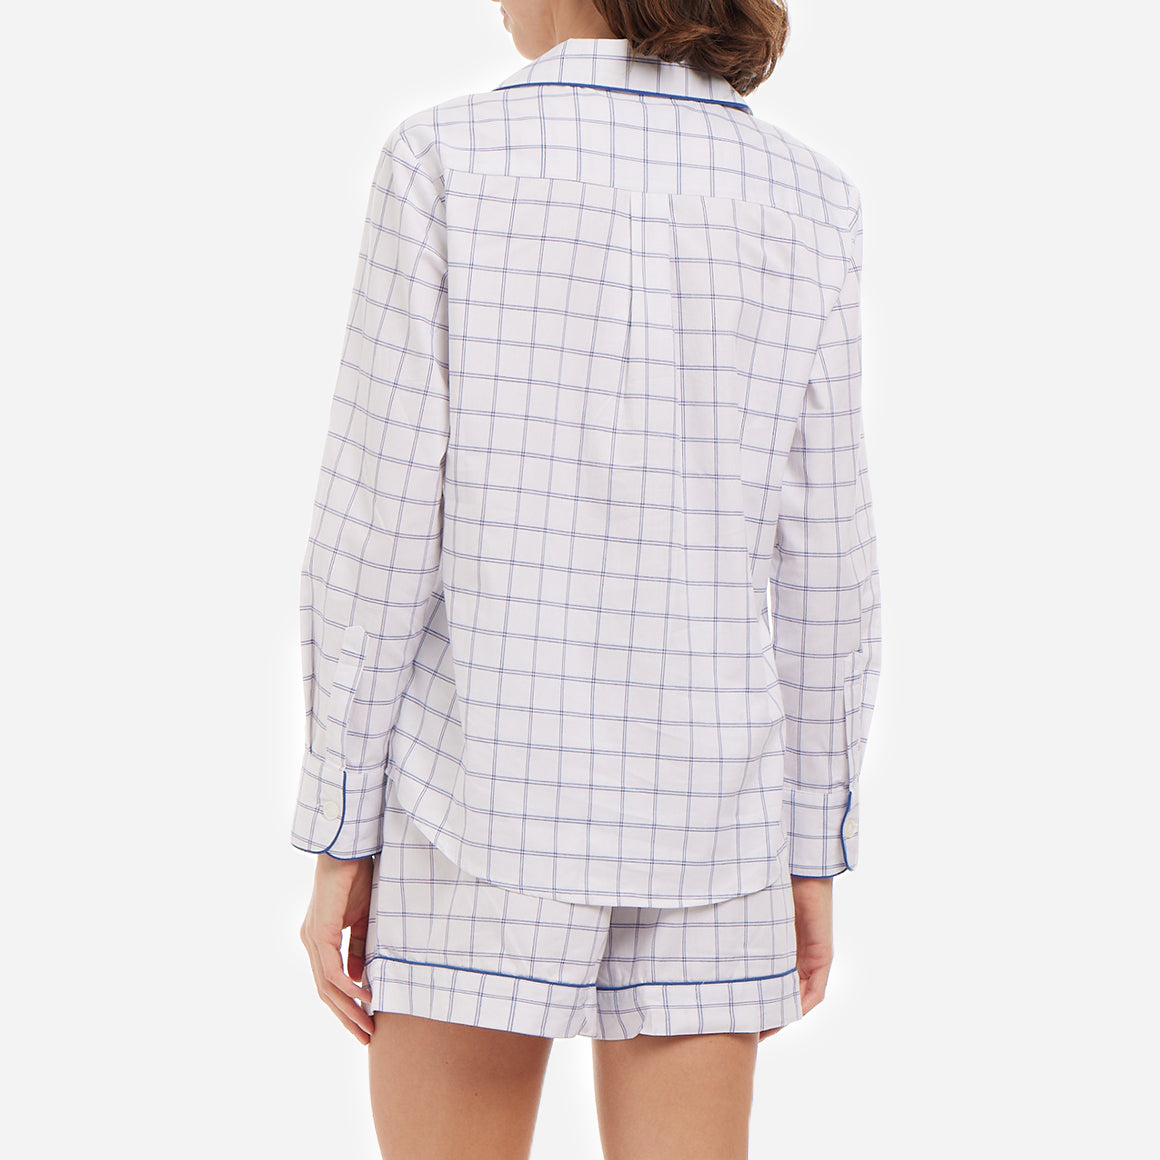 This classic tattersall check set is made from breathable and soft brushed cotton that feels light and heavenly on your skin. The pajama shirt has a relaxed cut for unrestricted movement, while the shorts feature a comfy elastic waist for a custom fit.